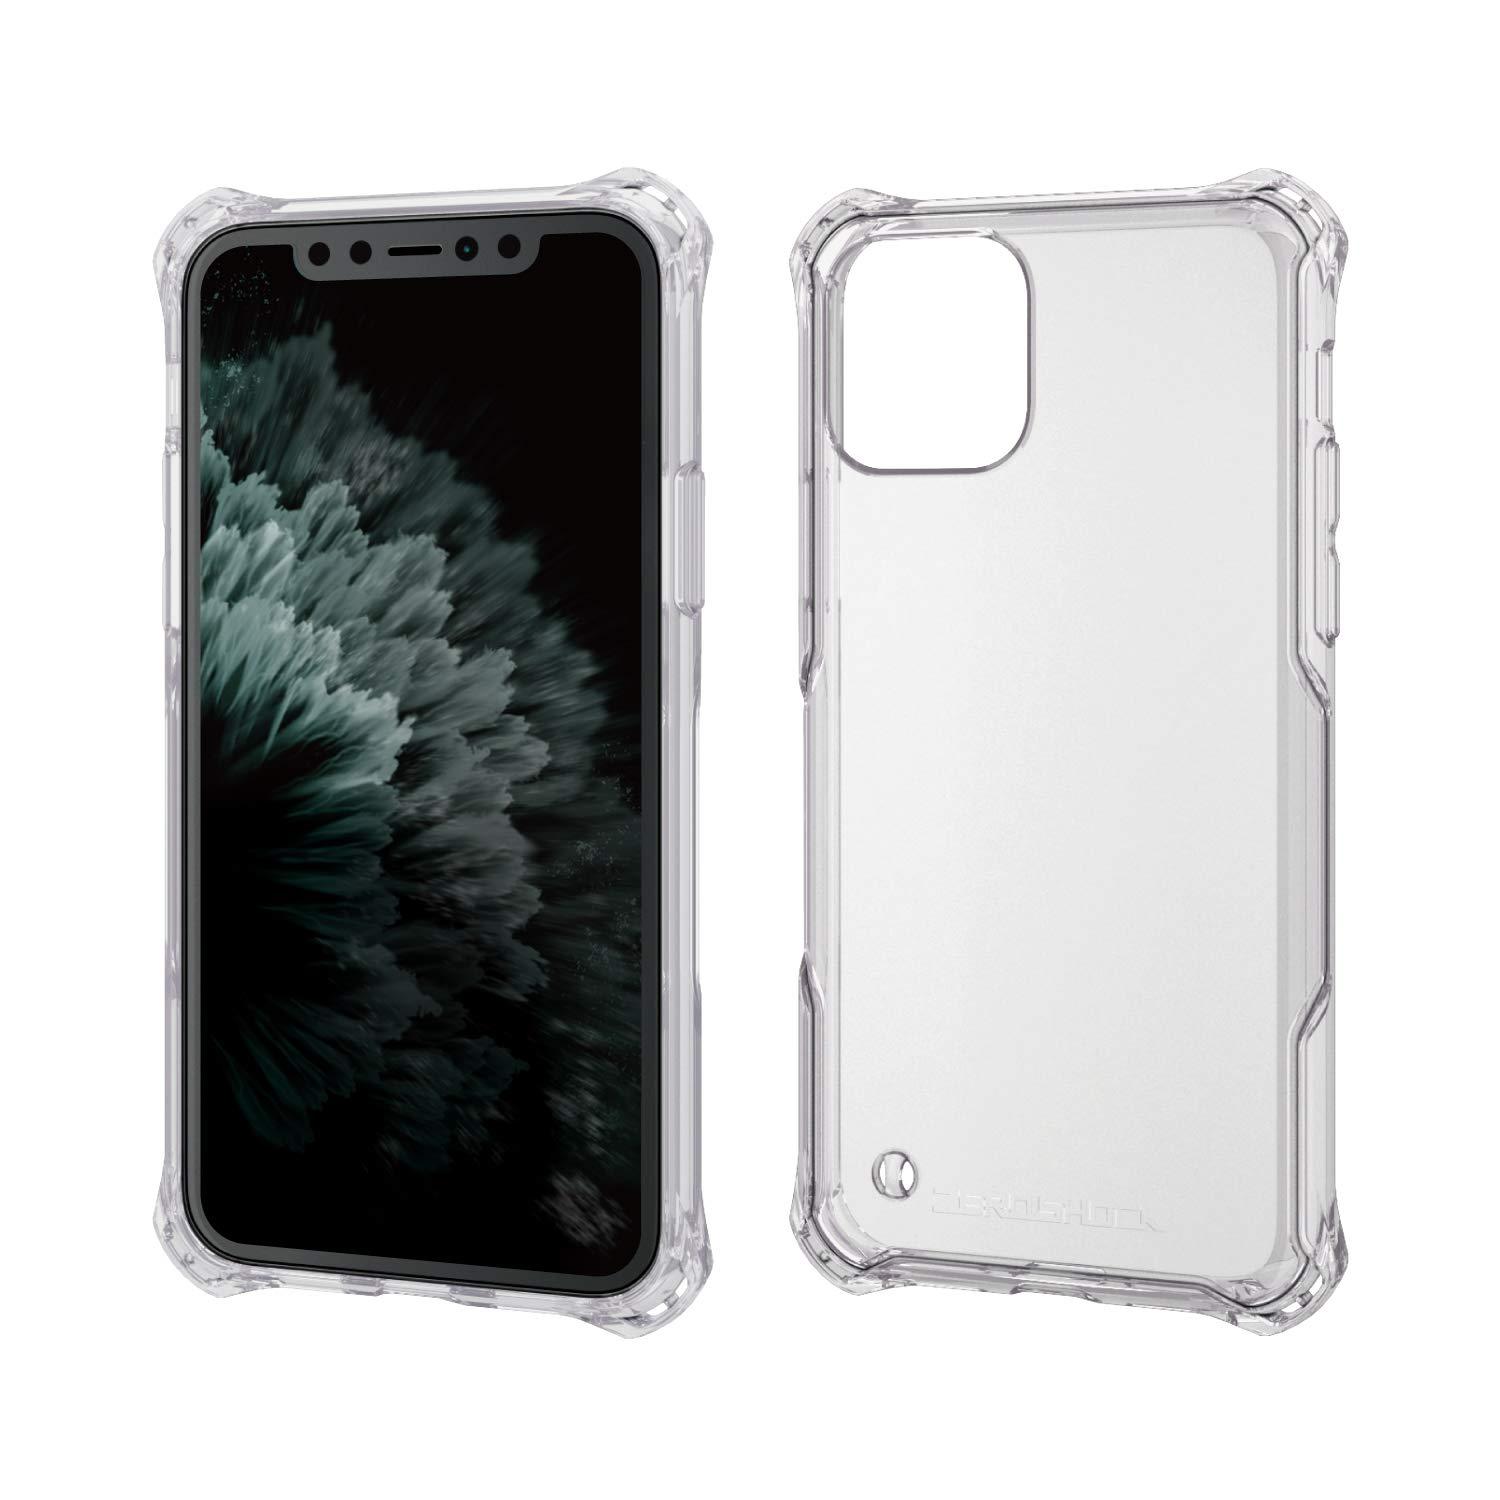 ELECOM- Japan Brand-Zero Shock Case/ Compatible with iPhone 11 Pro 5.8inch/  Hybrid type (TPU and PC)/ Include a protector/ Wireless Charge Compatible/  Clear PM-A19BZEROTCR Lazada PH